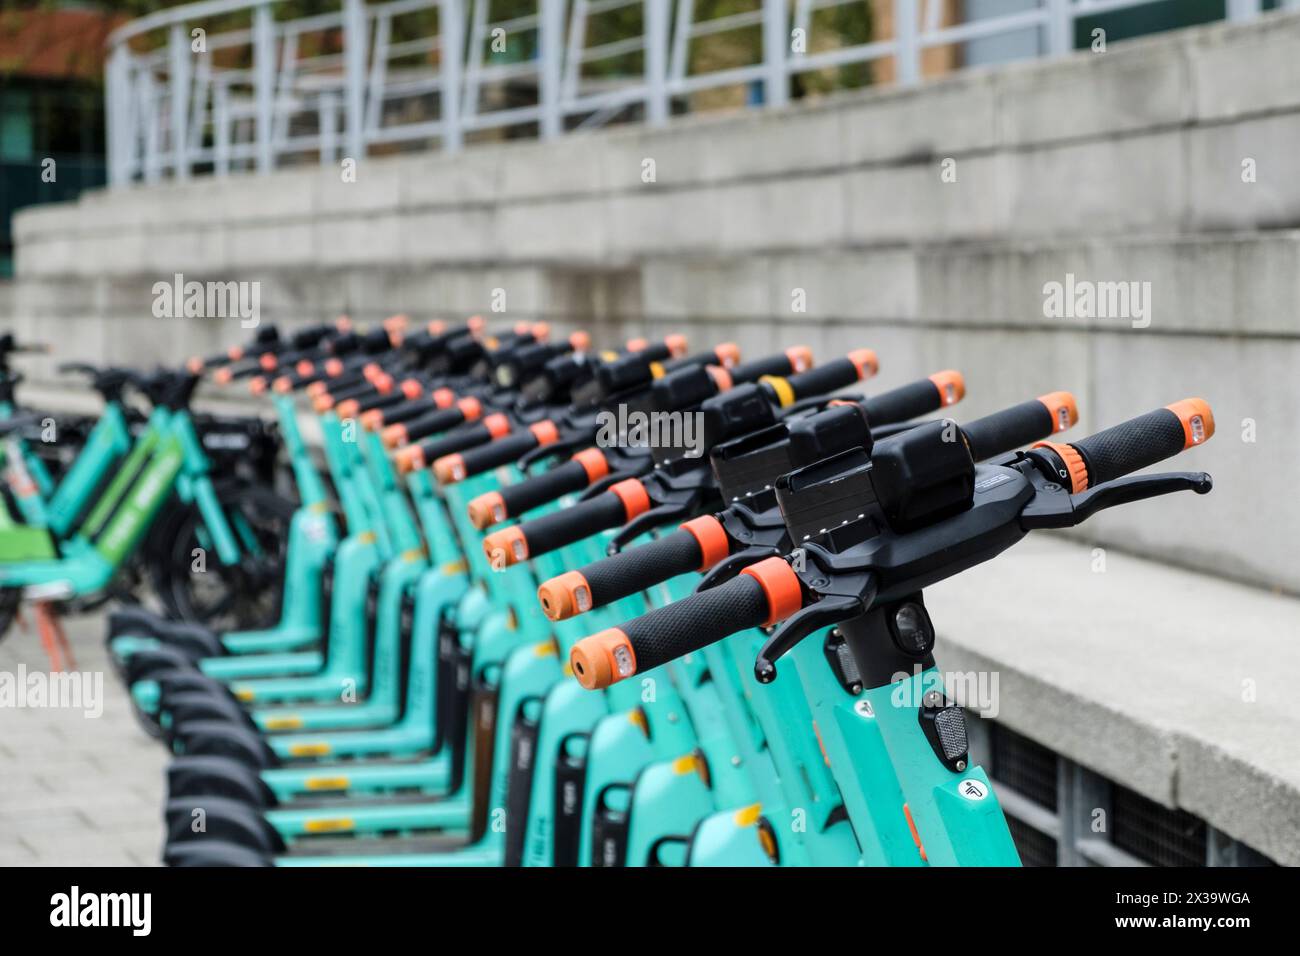 A row of Tier E-scooters Stock Photo